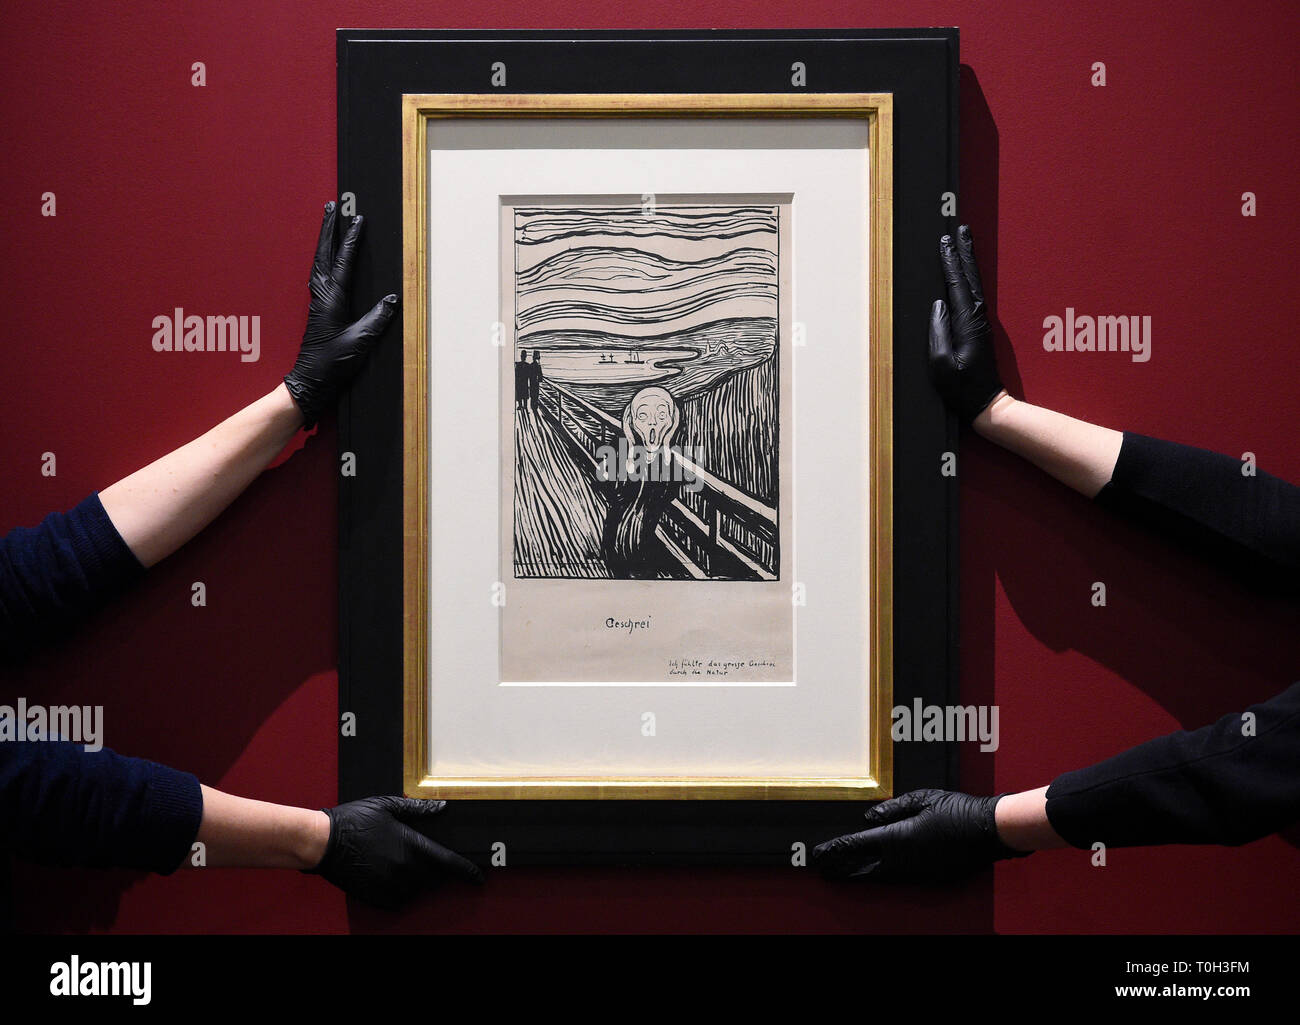 Gallery technicians install Edvard Munch’s The Scream at the British Museum in London, ahead of the opening of Edvard Munch: love and angst exhibition, which runs from 11 April to 21 July 2019. Stock Photo